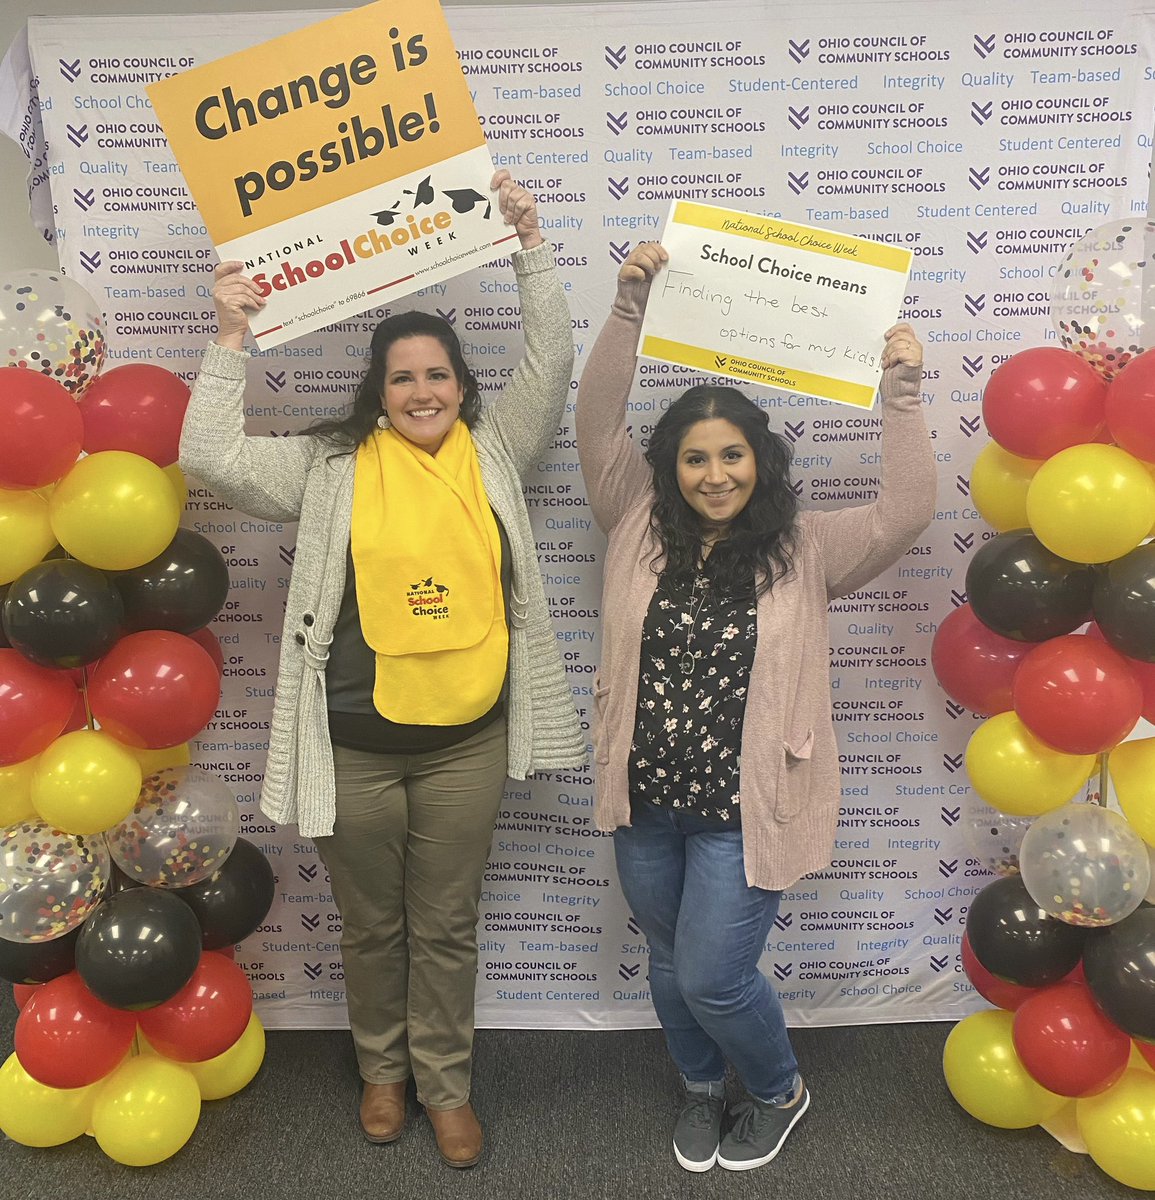 Seeing my children thriving at their Charter School is reason enough for me to celebrate #SchoolChoice #schoolchoiceweek #iTrustParents @schoolchoicewk #occscharters